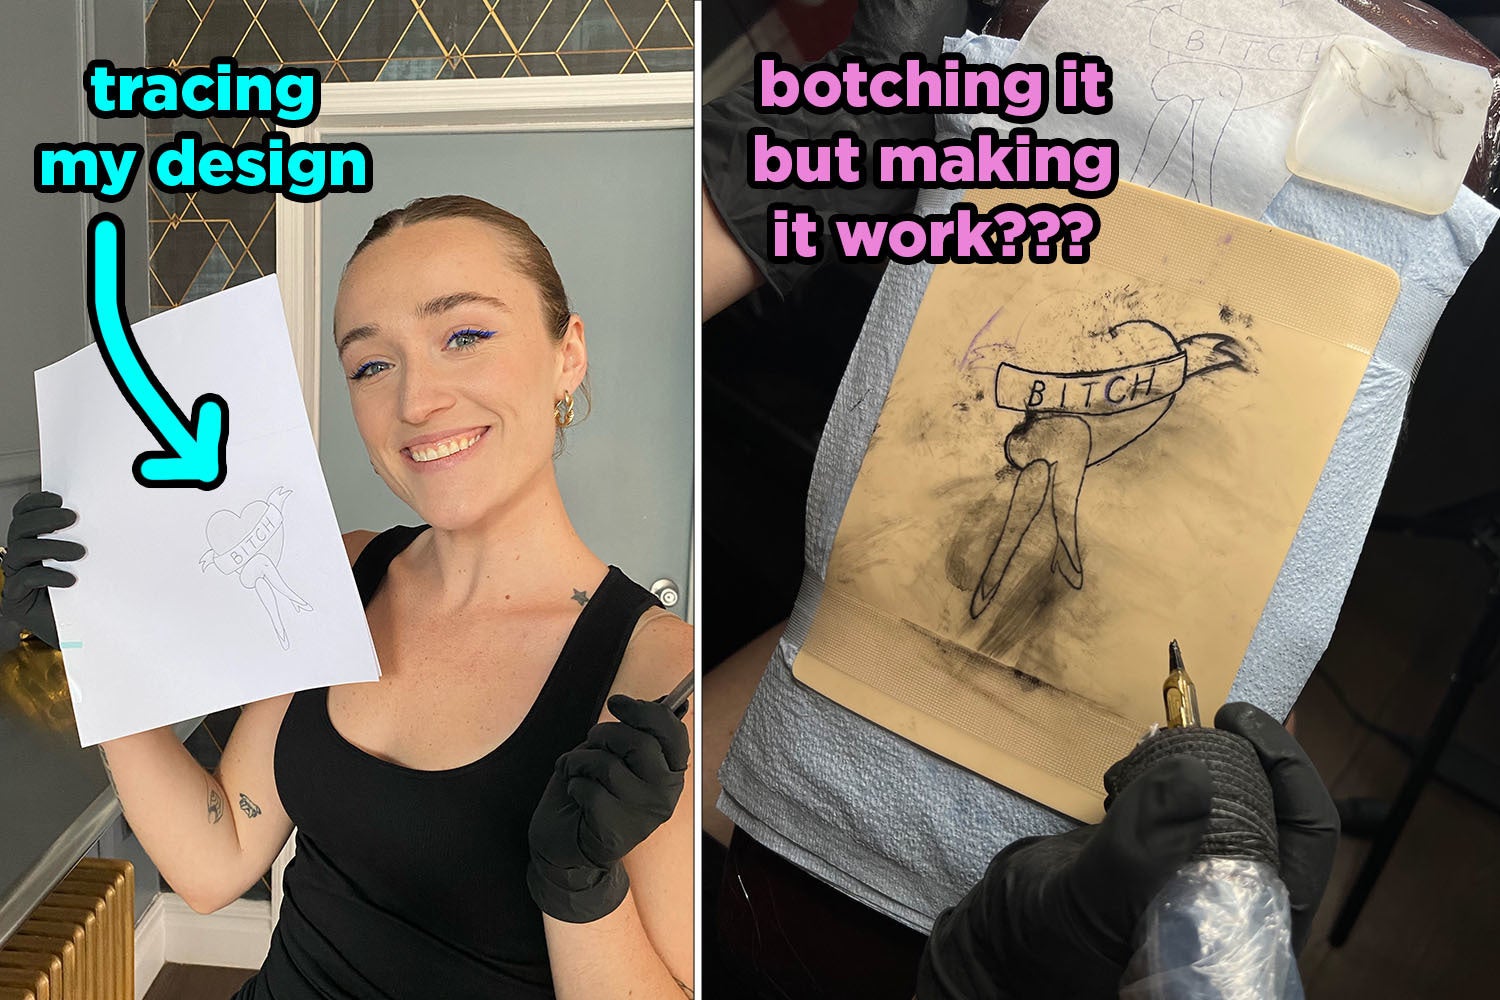 I Tattoo Apprenticed For A Day And Got A Crash Course In The Craft — Here's Everything You Should Know